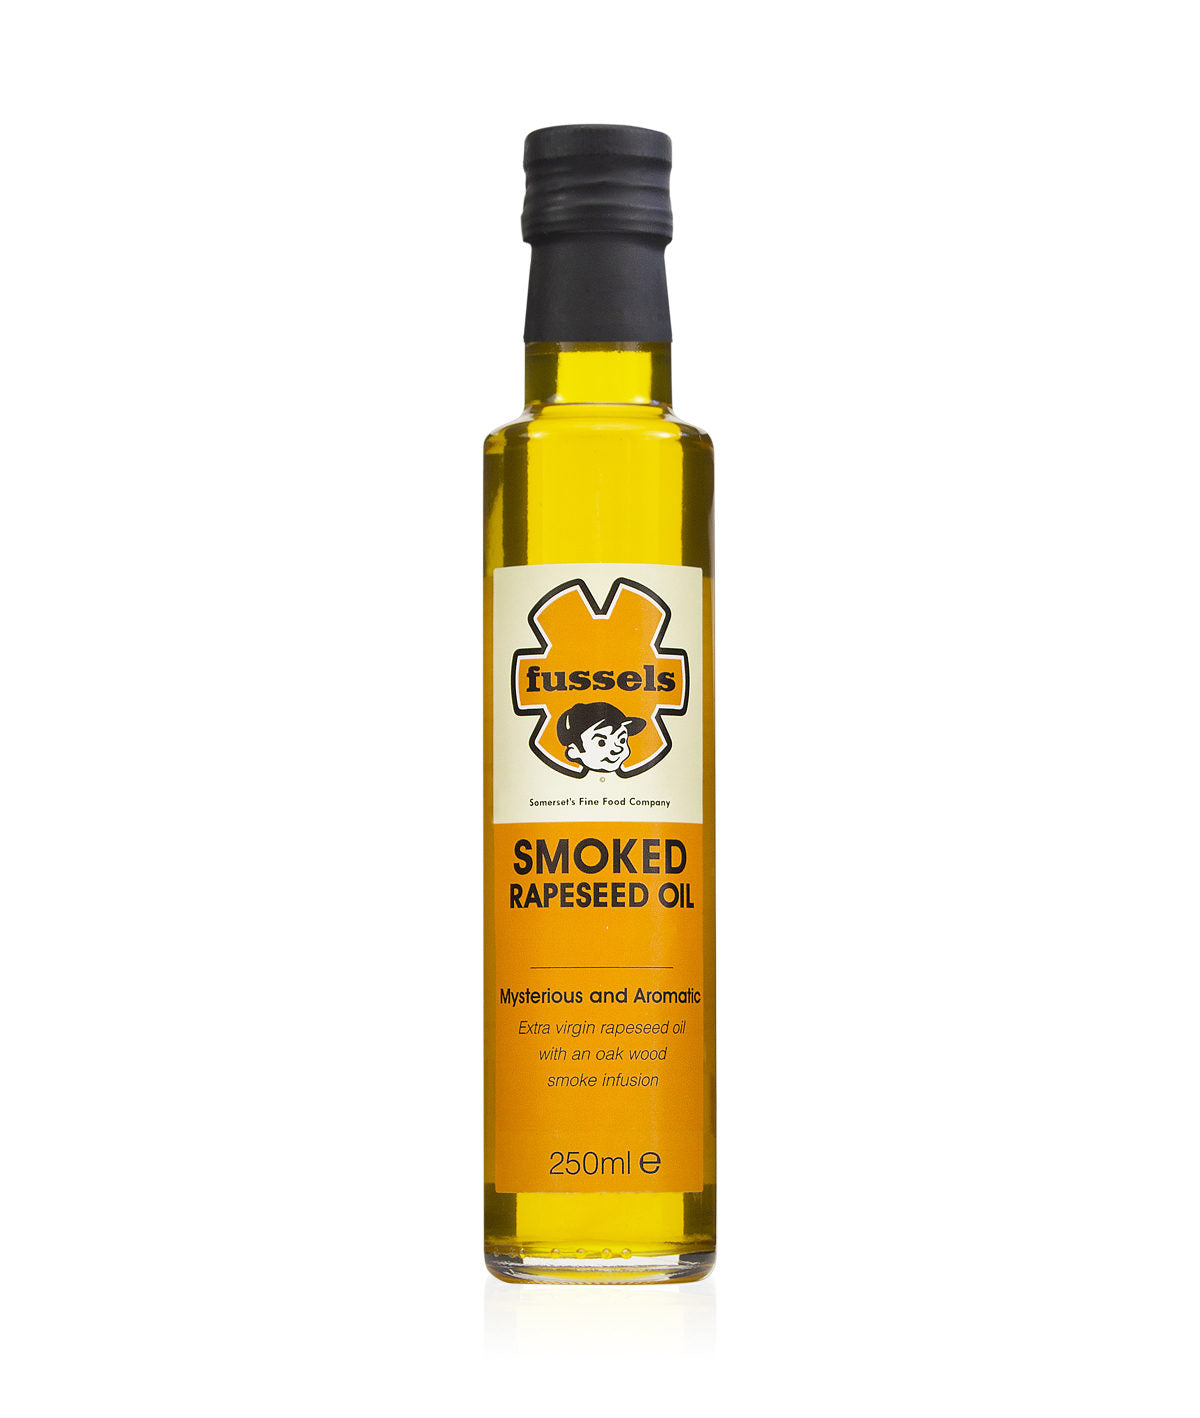 Fussels Smoked Rapeseed Oil, 250ml